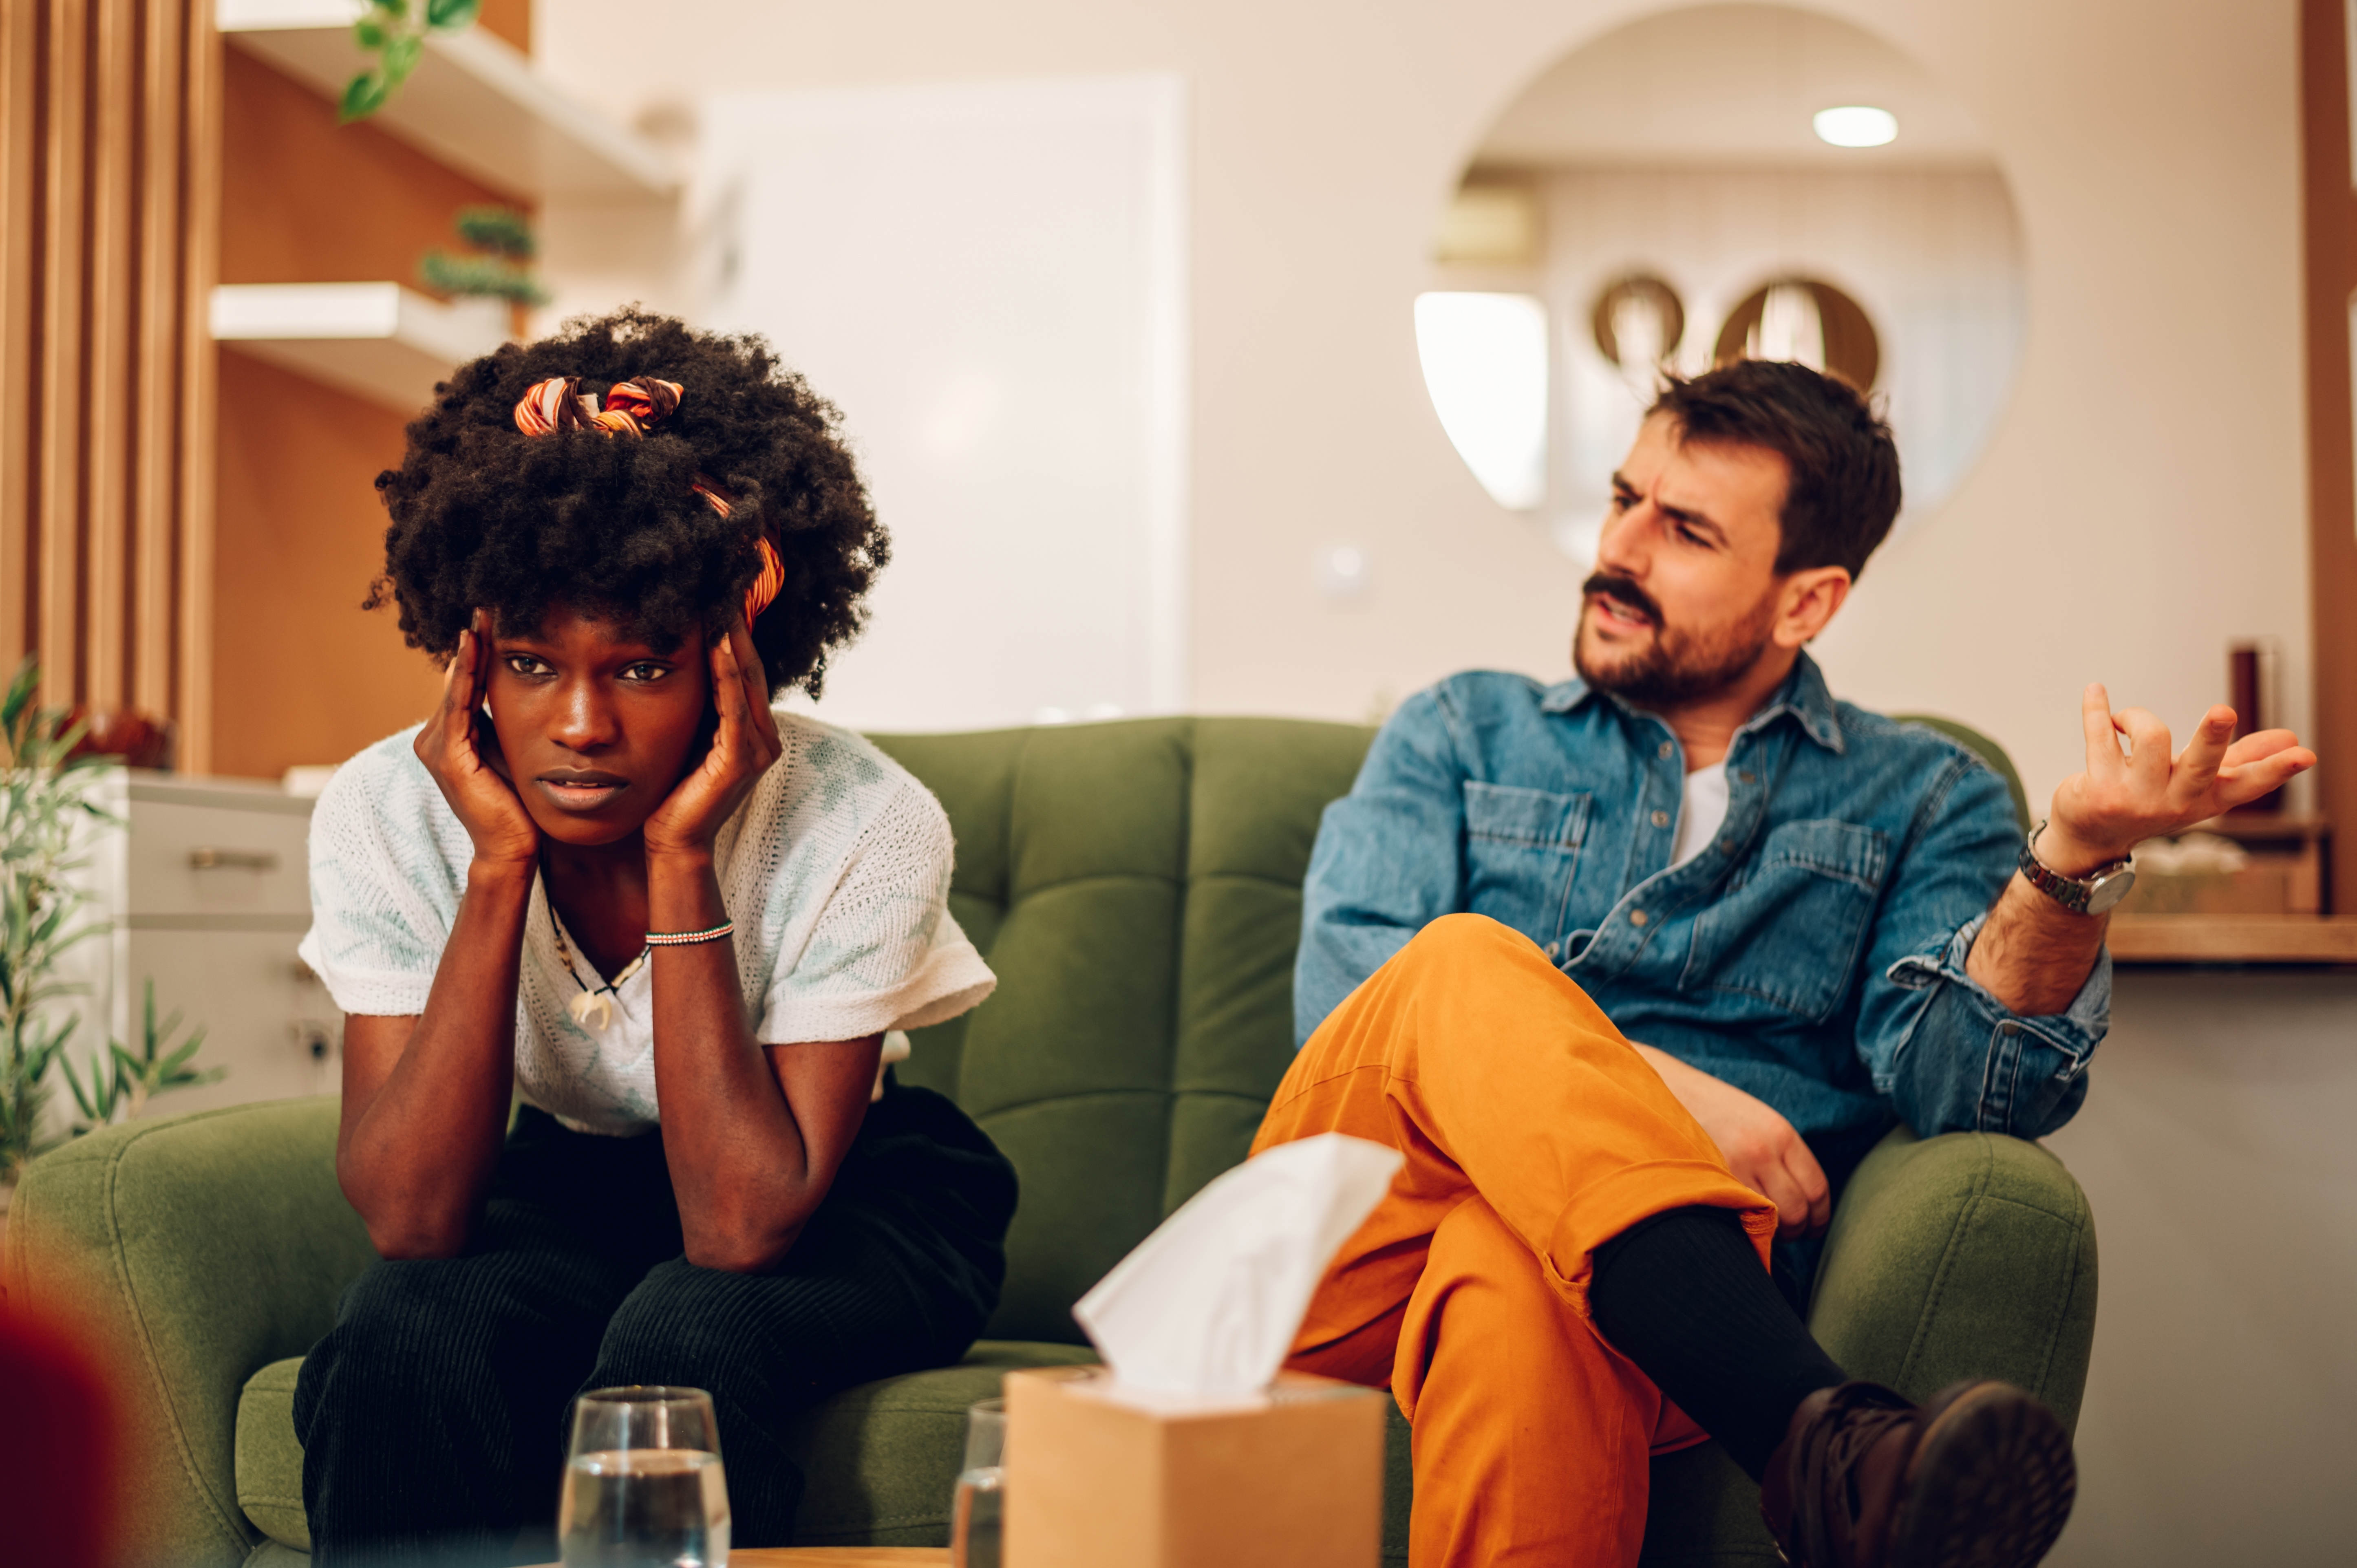 A White man and a Black woman having a disagreement while sitting on a couch. | Source: Shutterstock